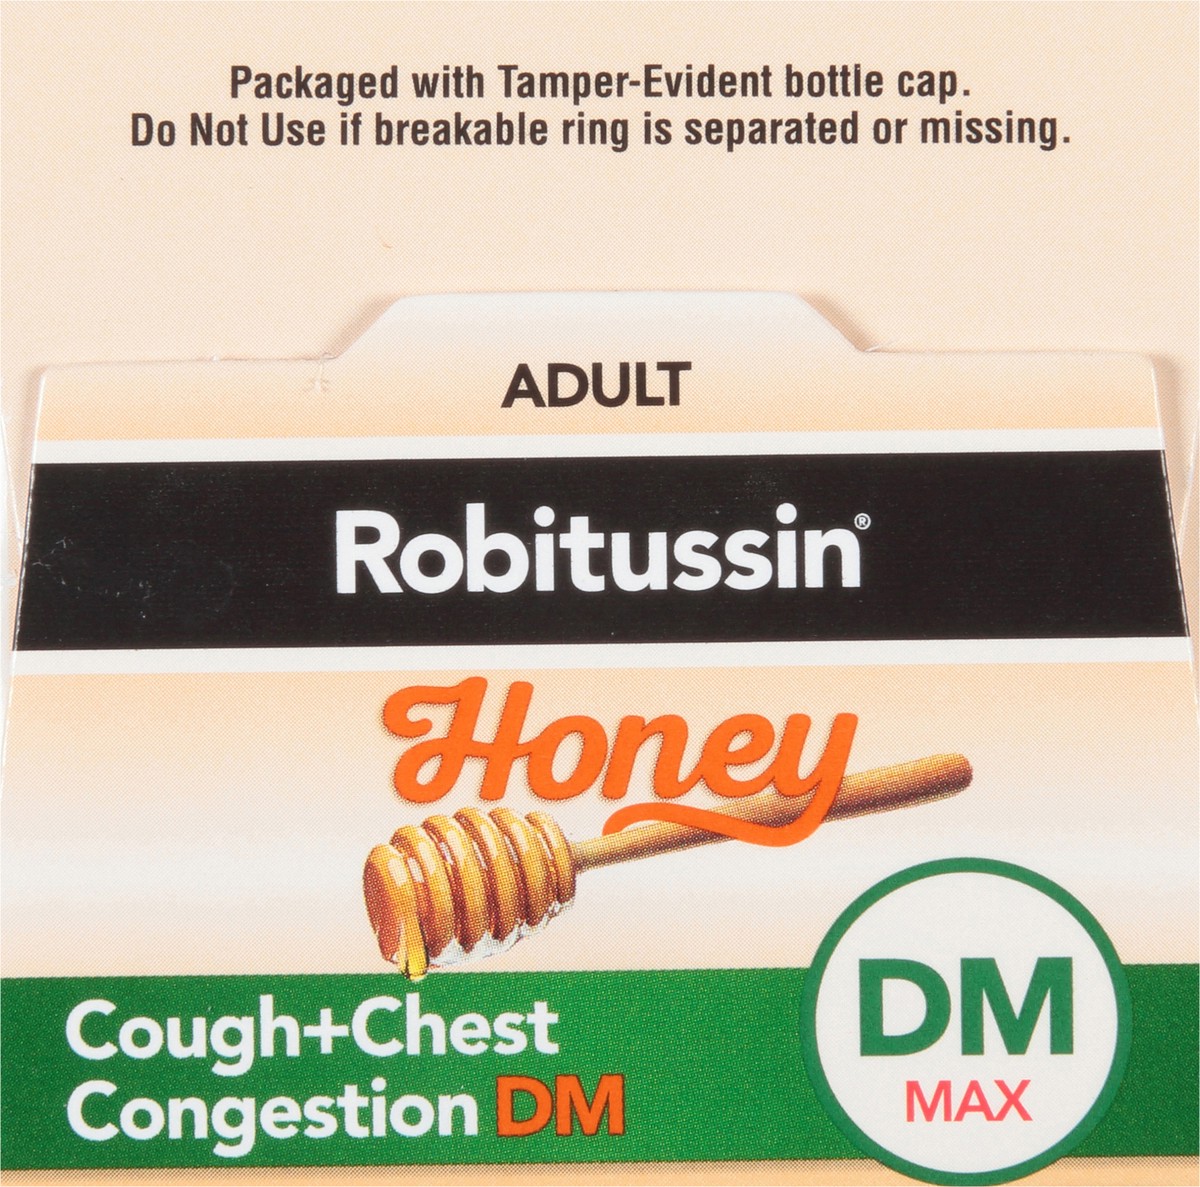 slide 9 of 9, Robitussin Maximum Strength Honey Cough + Chest Congestion DM, Cough Medicine for Cough and Chest Congestion Relief Made with Real Honey - 8 Fl Oz Bottle, 8 fl oz